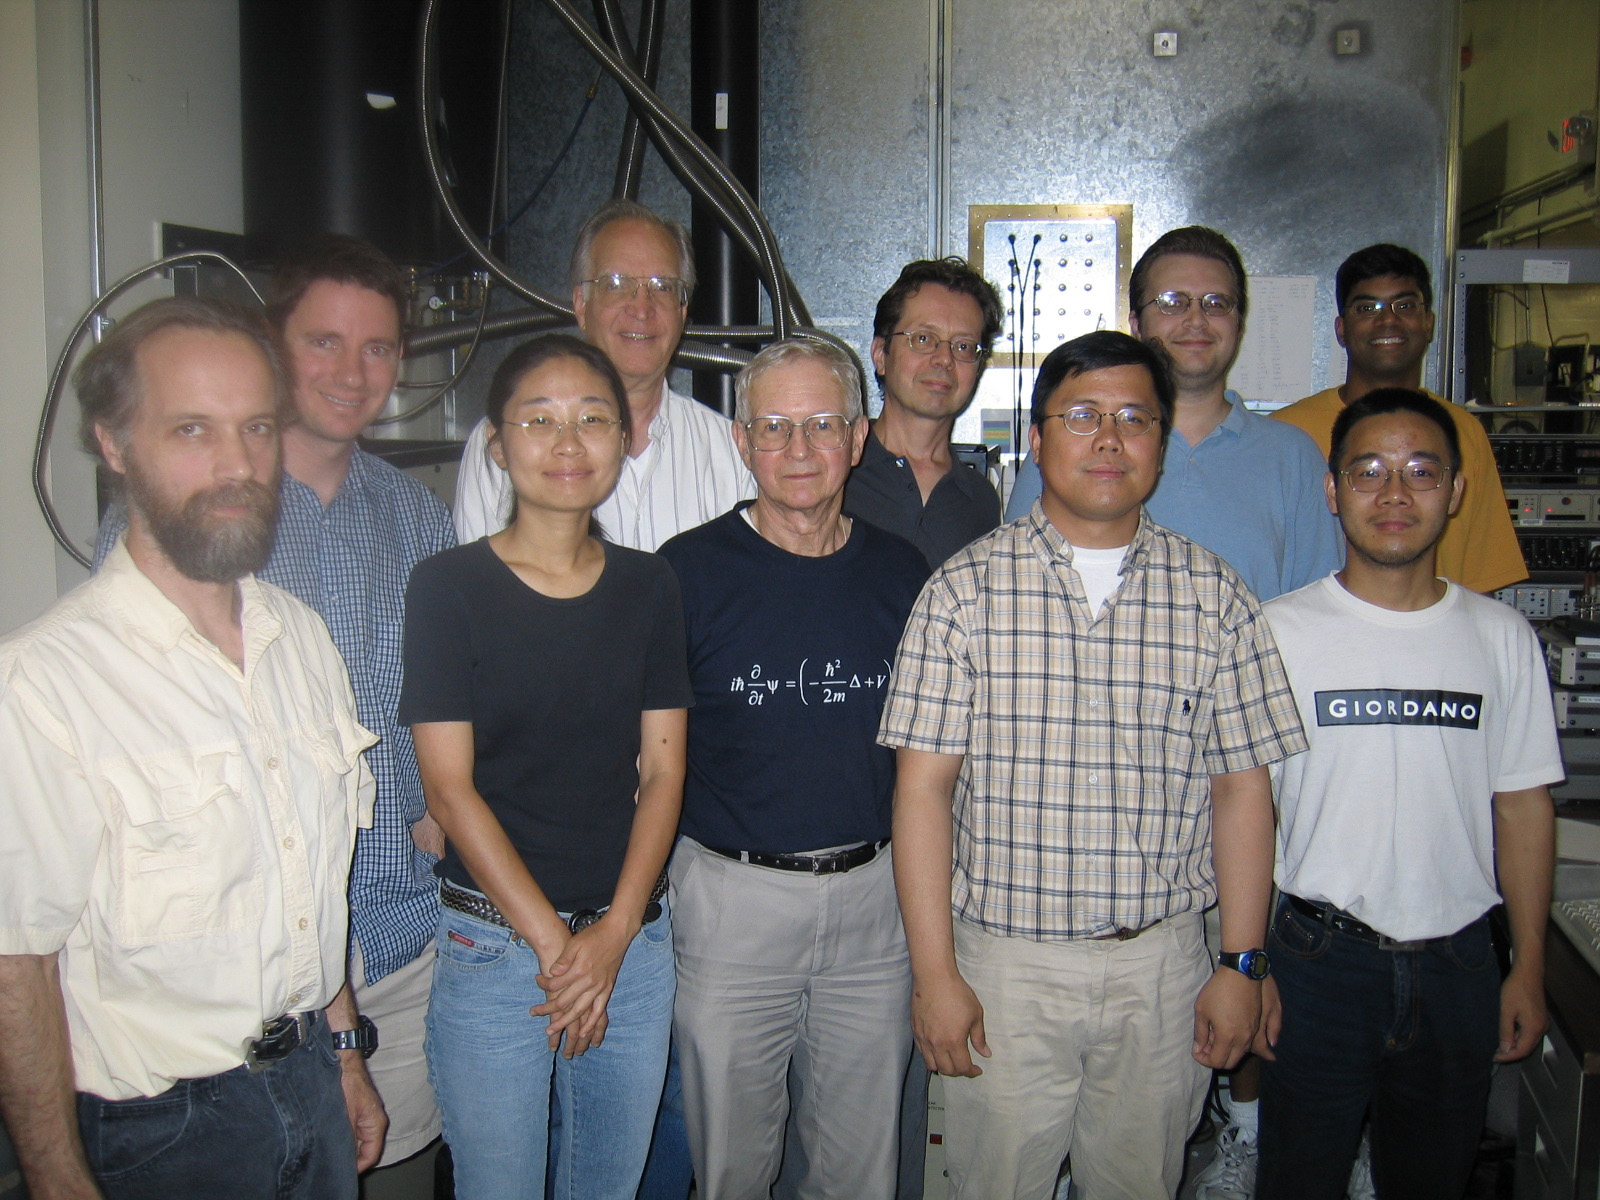 Dragt (rear, white shirt) with colleagues in the Center for Superconductivity Research (now QMC).